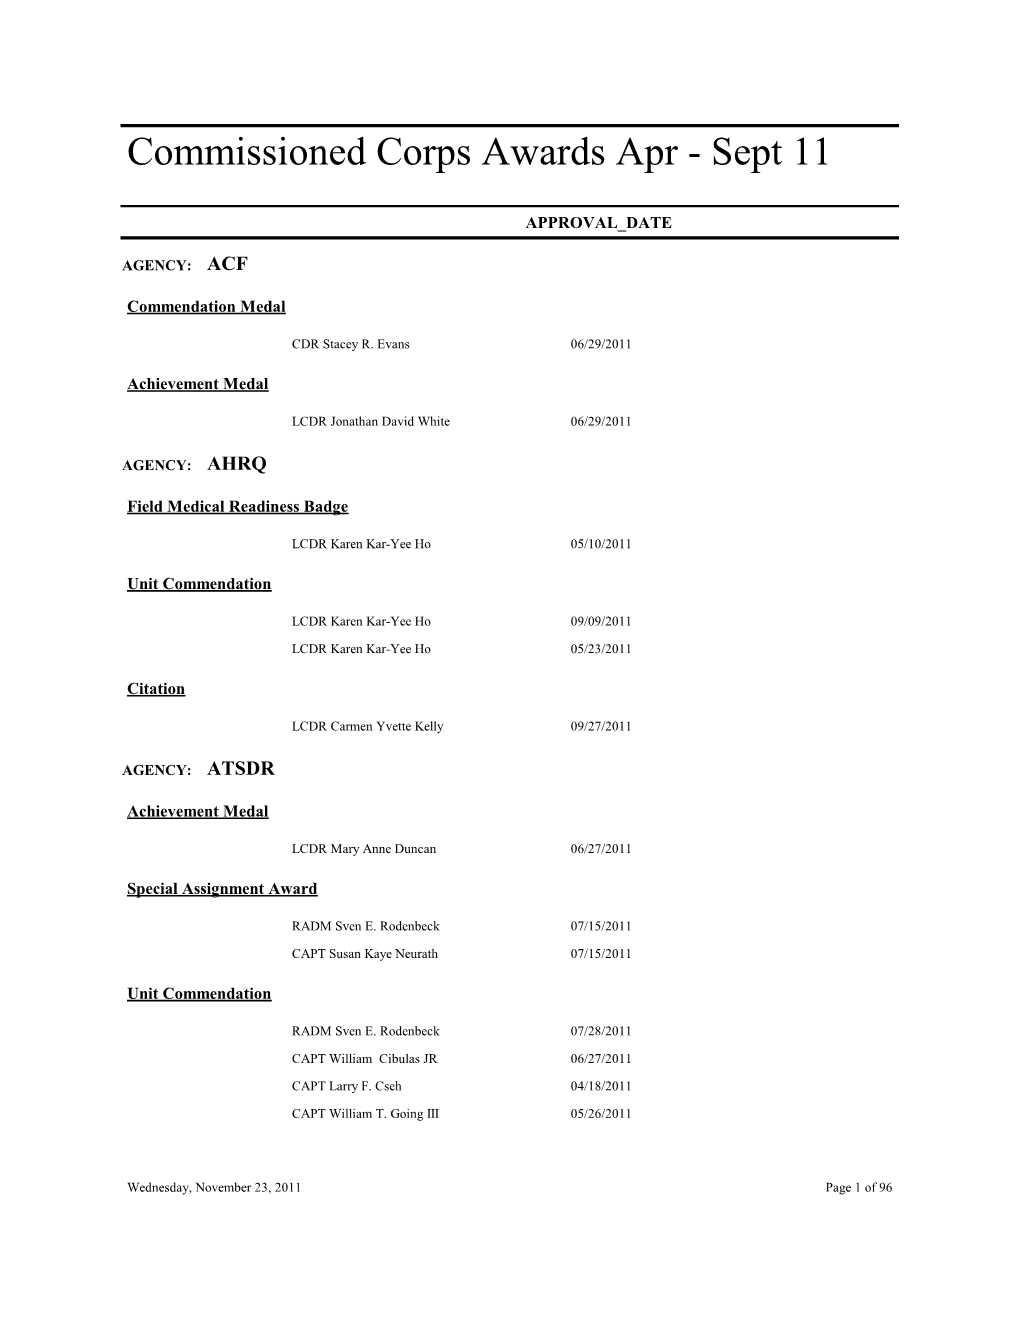 Commissioned Corps Awards Apr - Sept 11